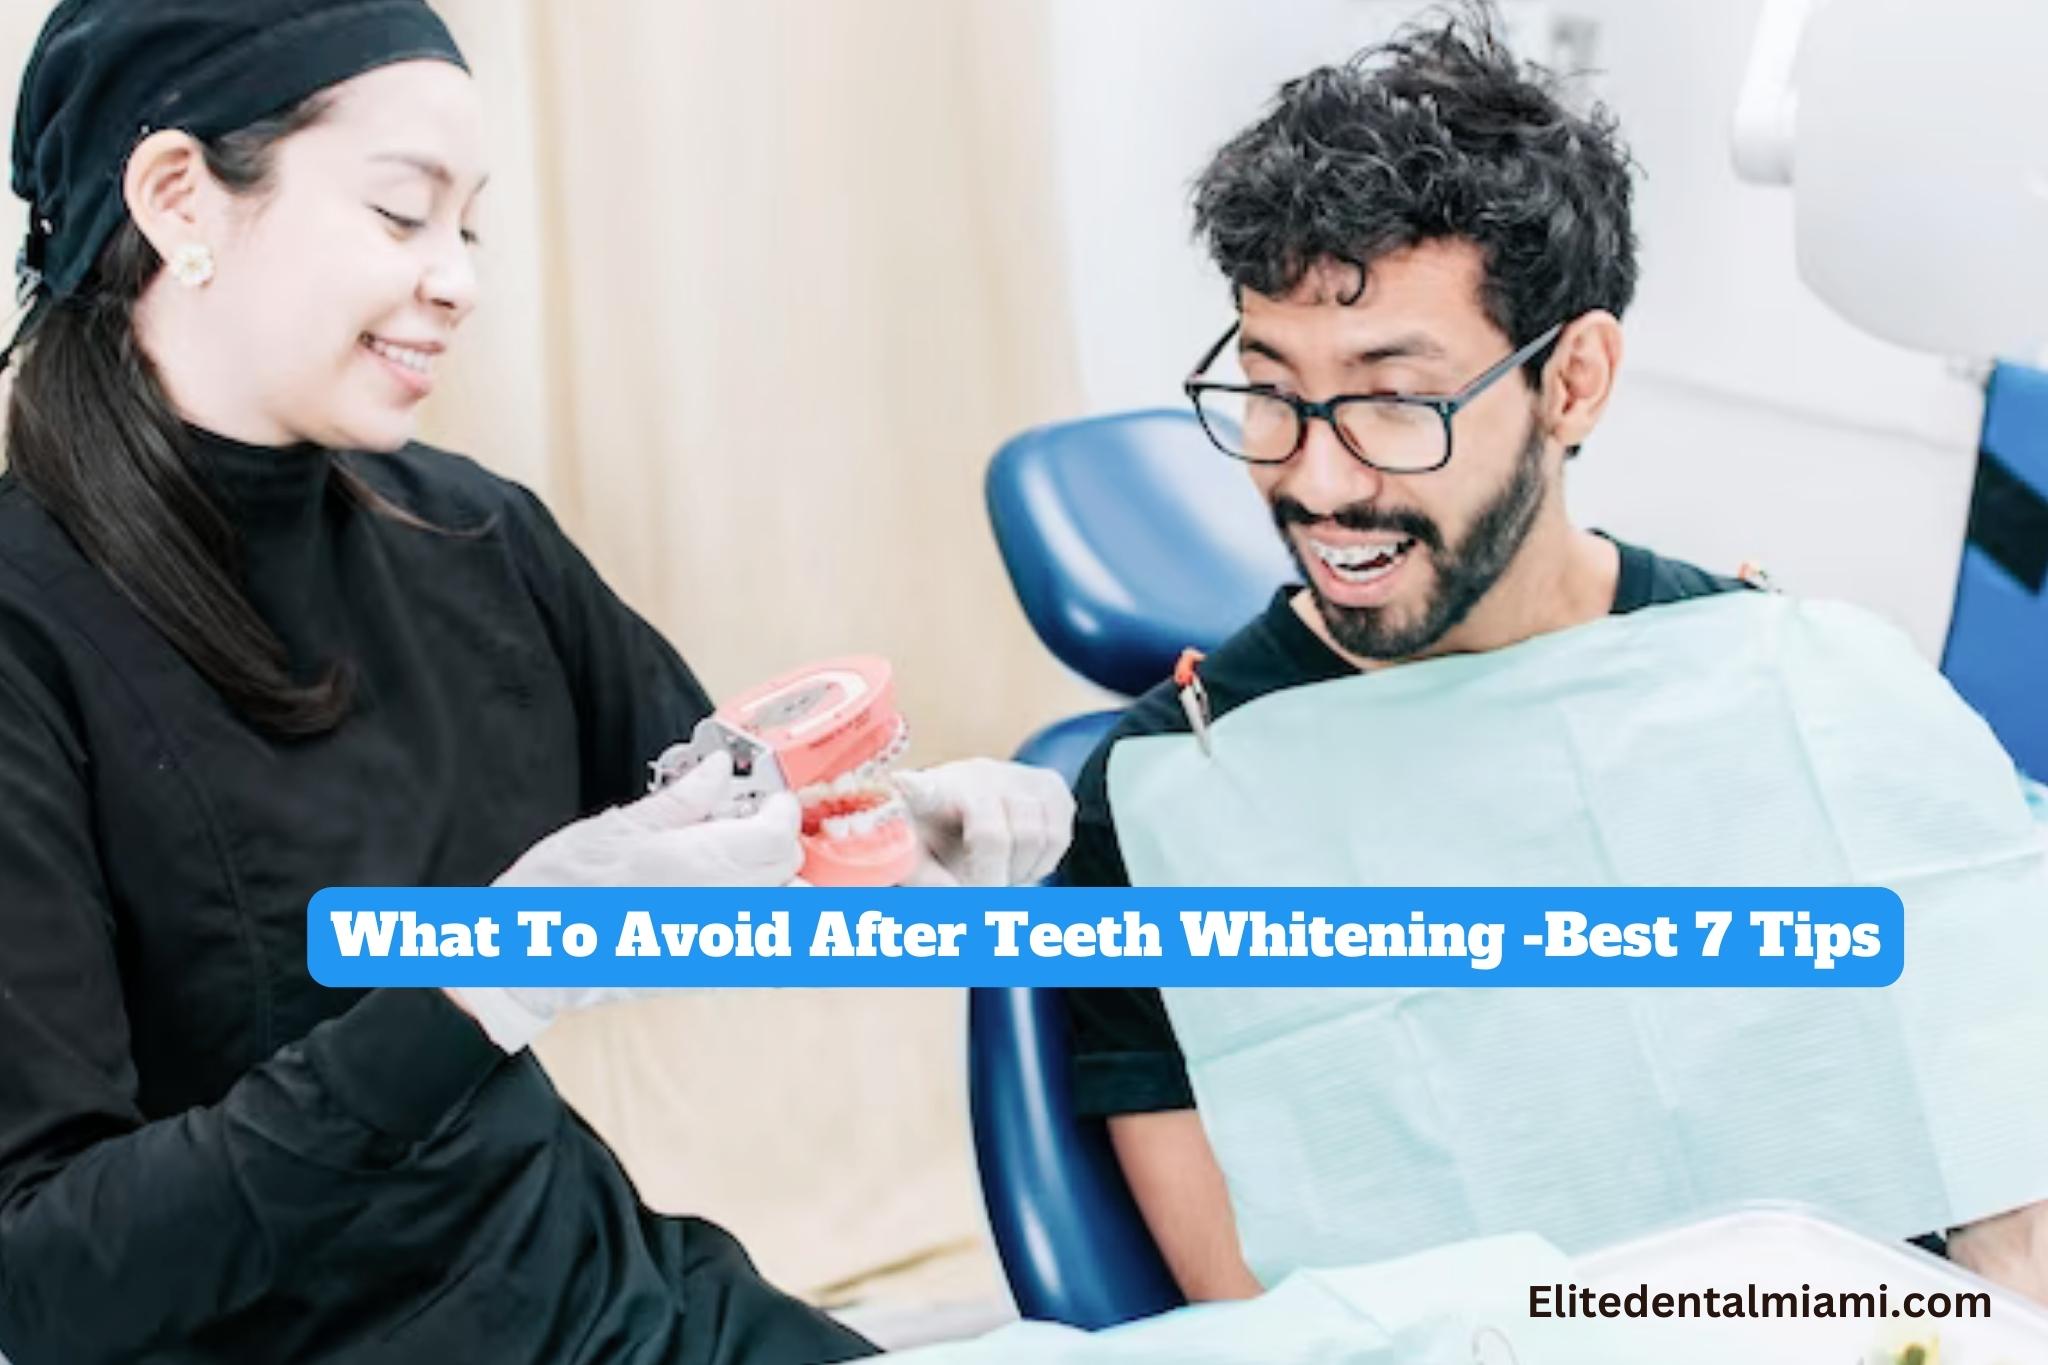 What To Avoid After Teeth Whitening